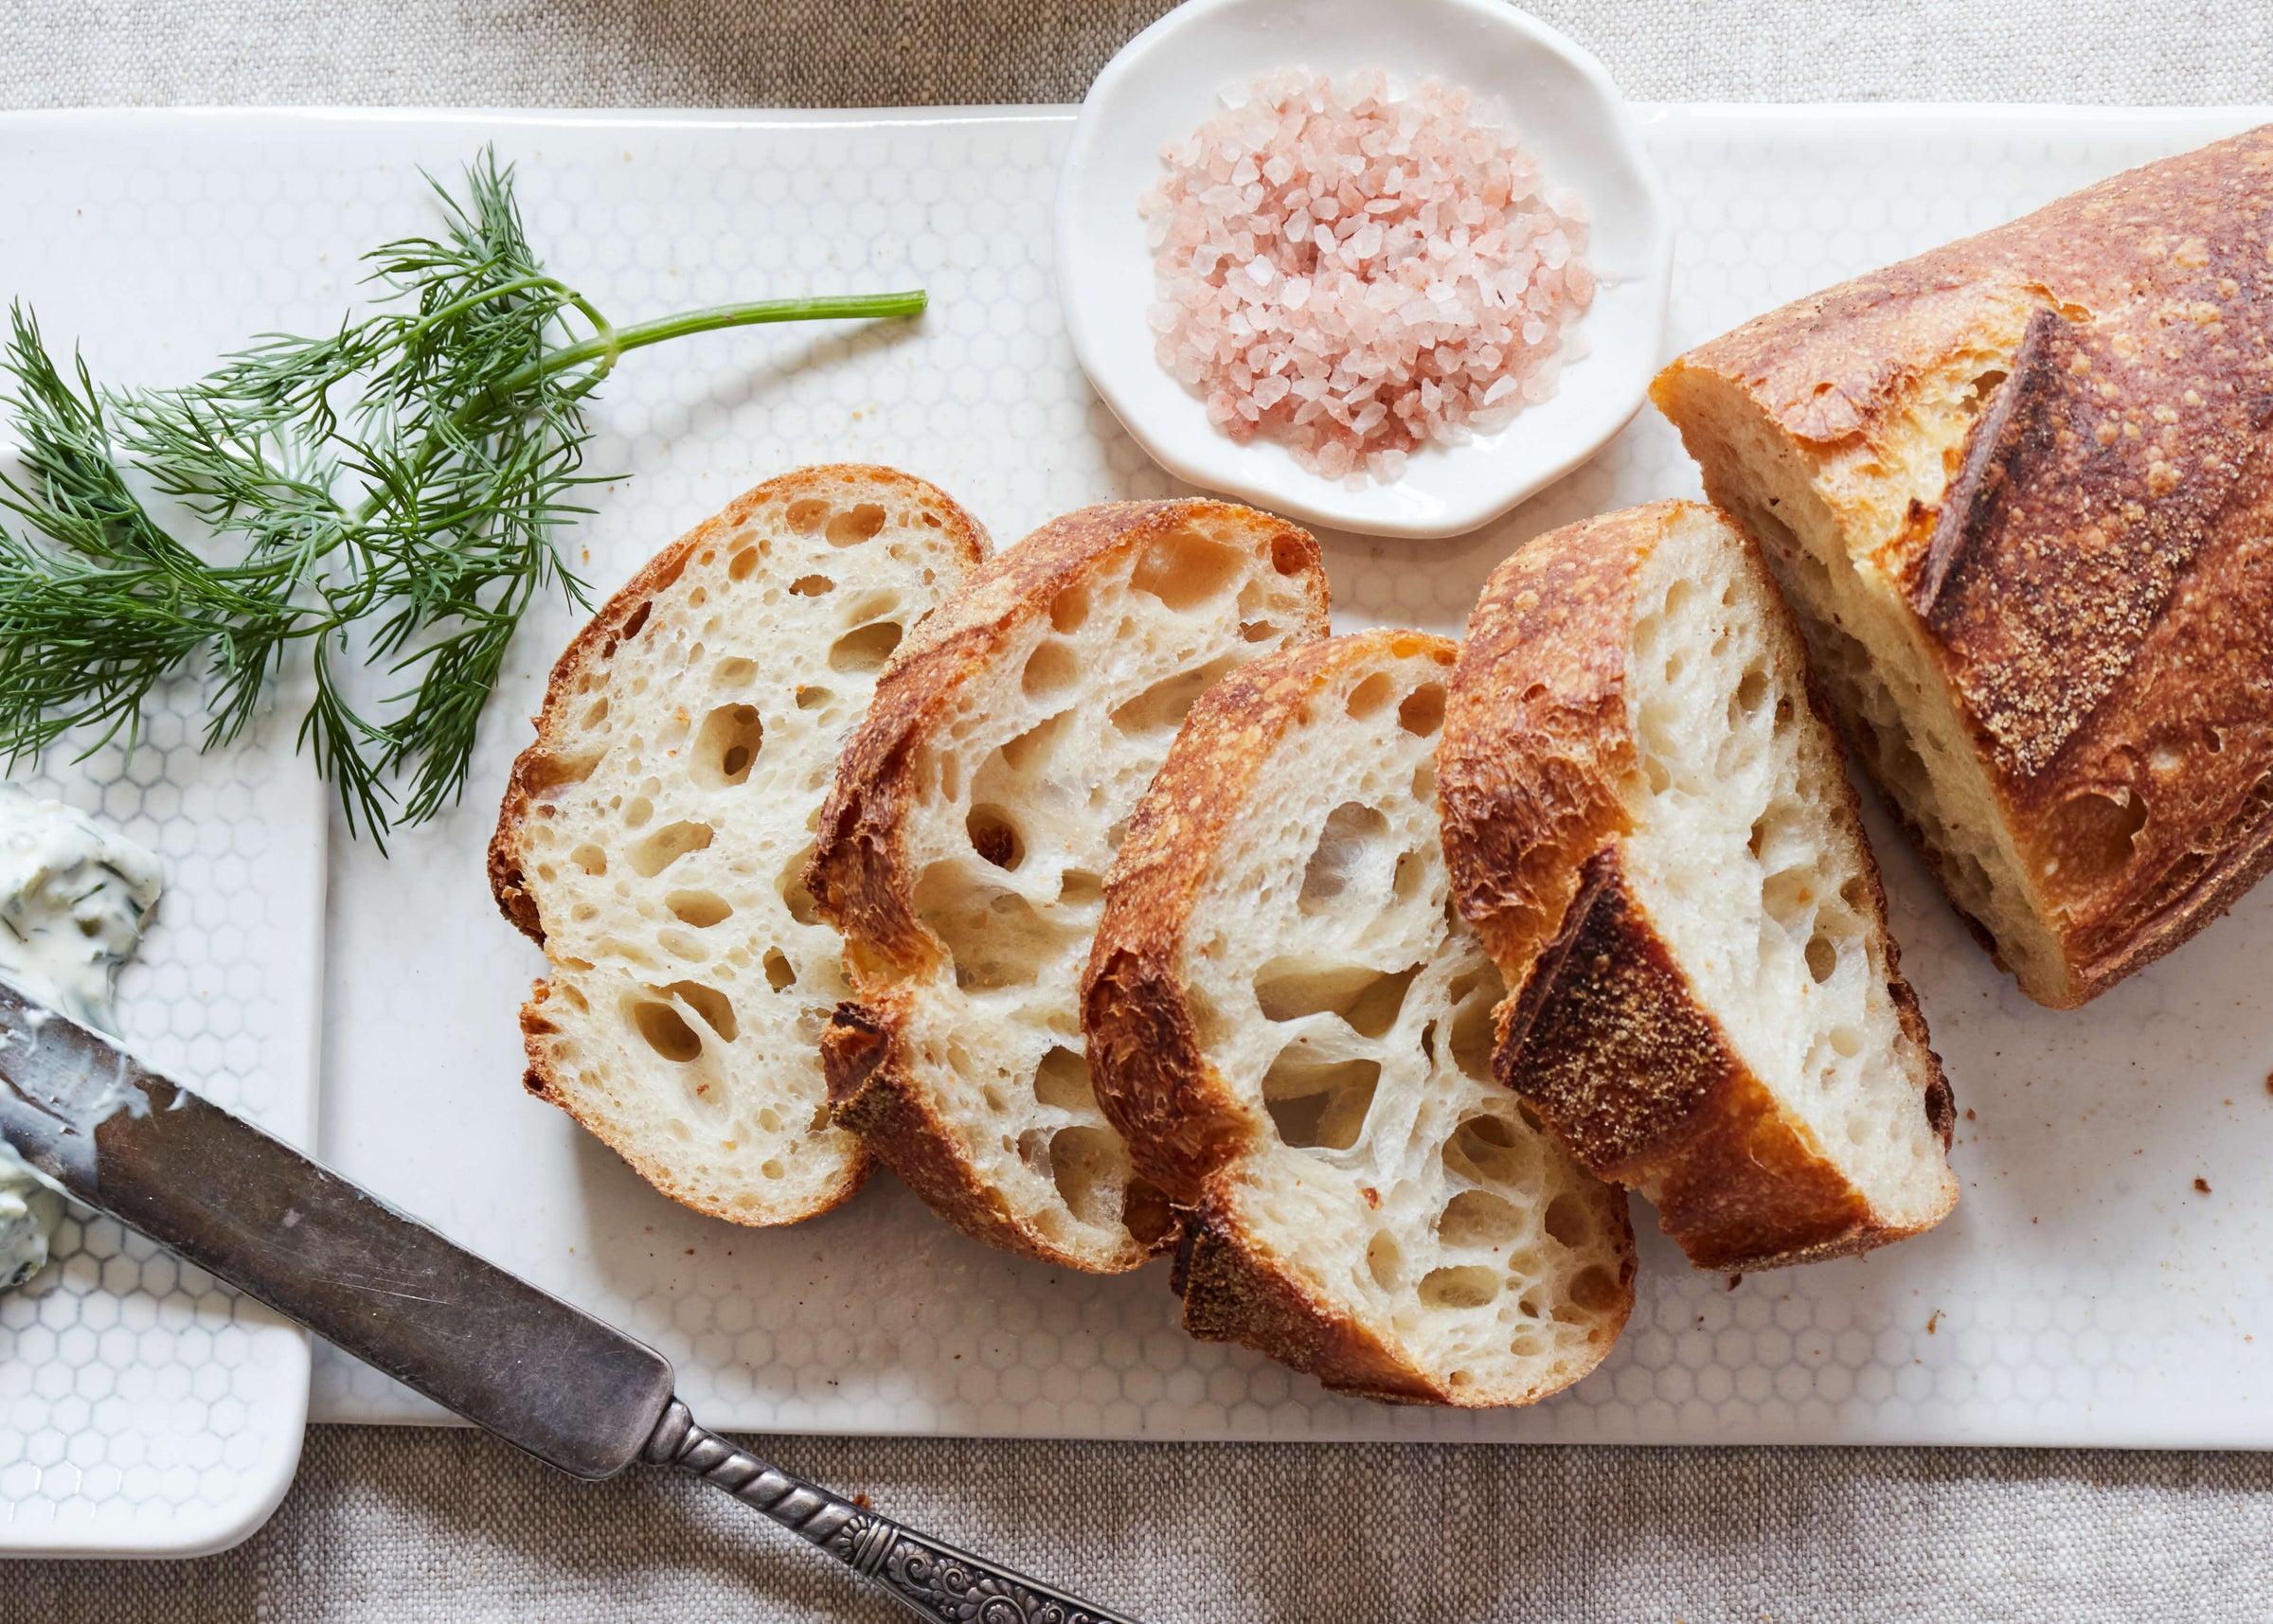 Bake Fresh Bread With A Wholesale bread slicer band 